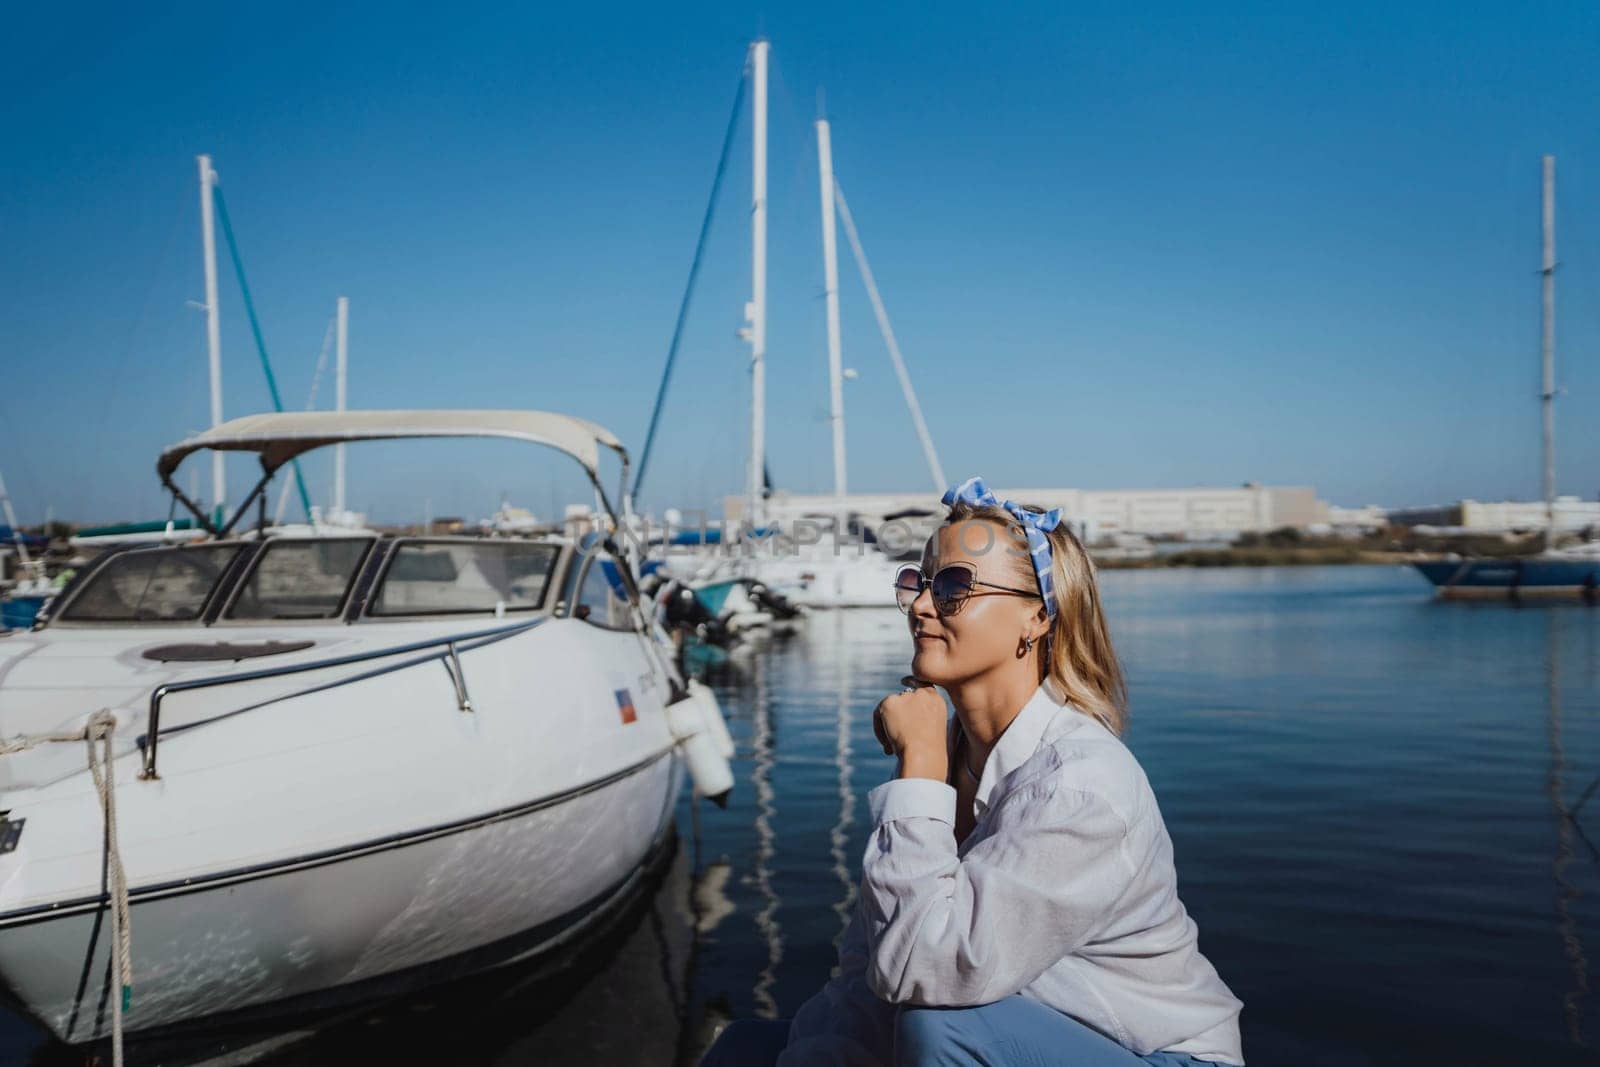 Woman in white shirt in marina , surrounded by several other boats. The marina is filled with boats of various sizes, creating a lively and picturesque atmosphere. by Matiunina